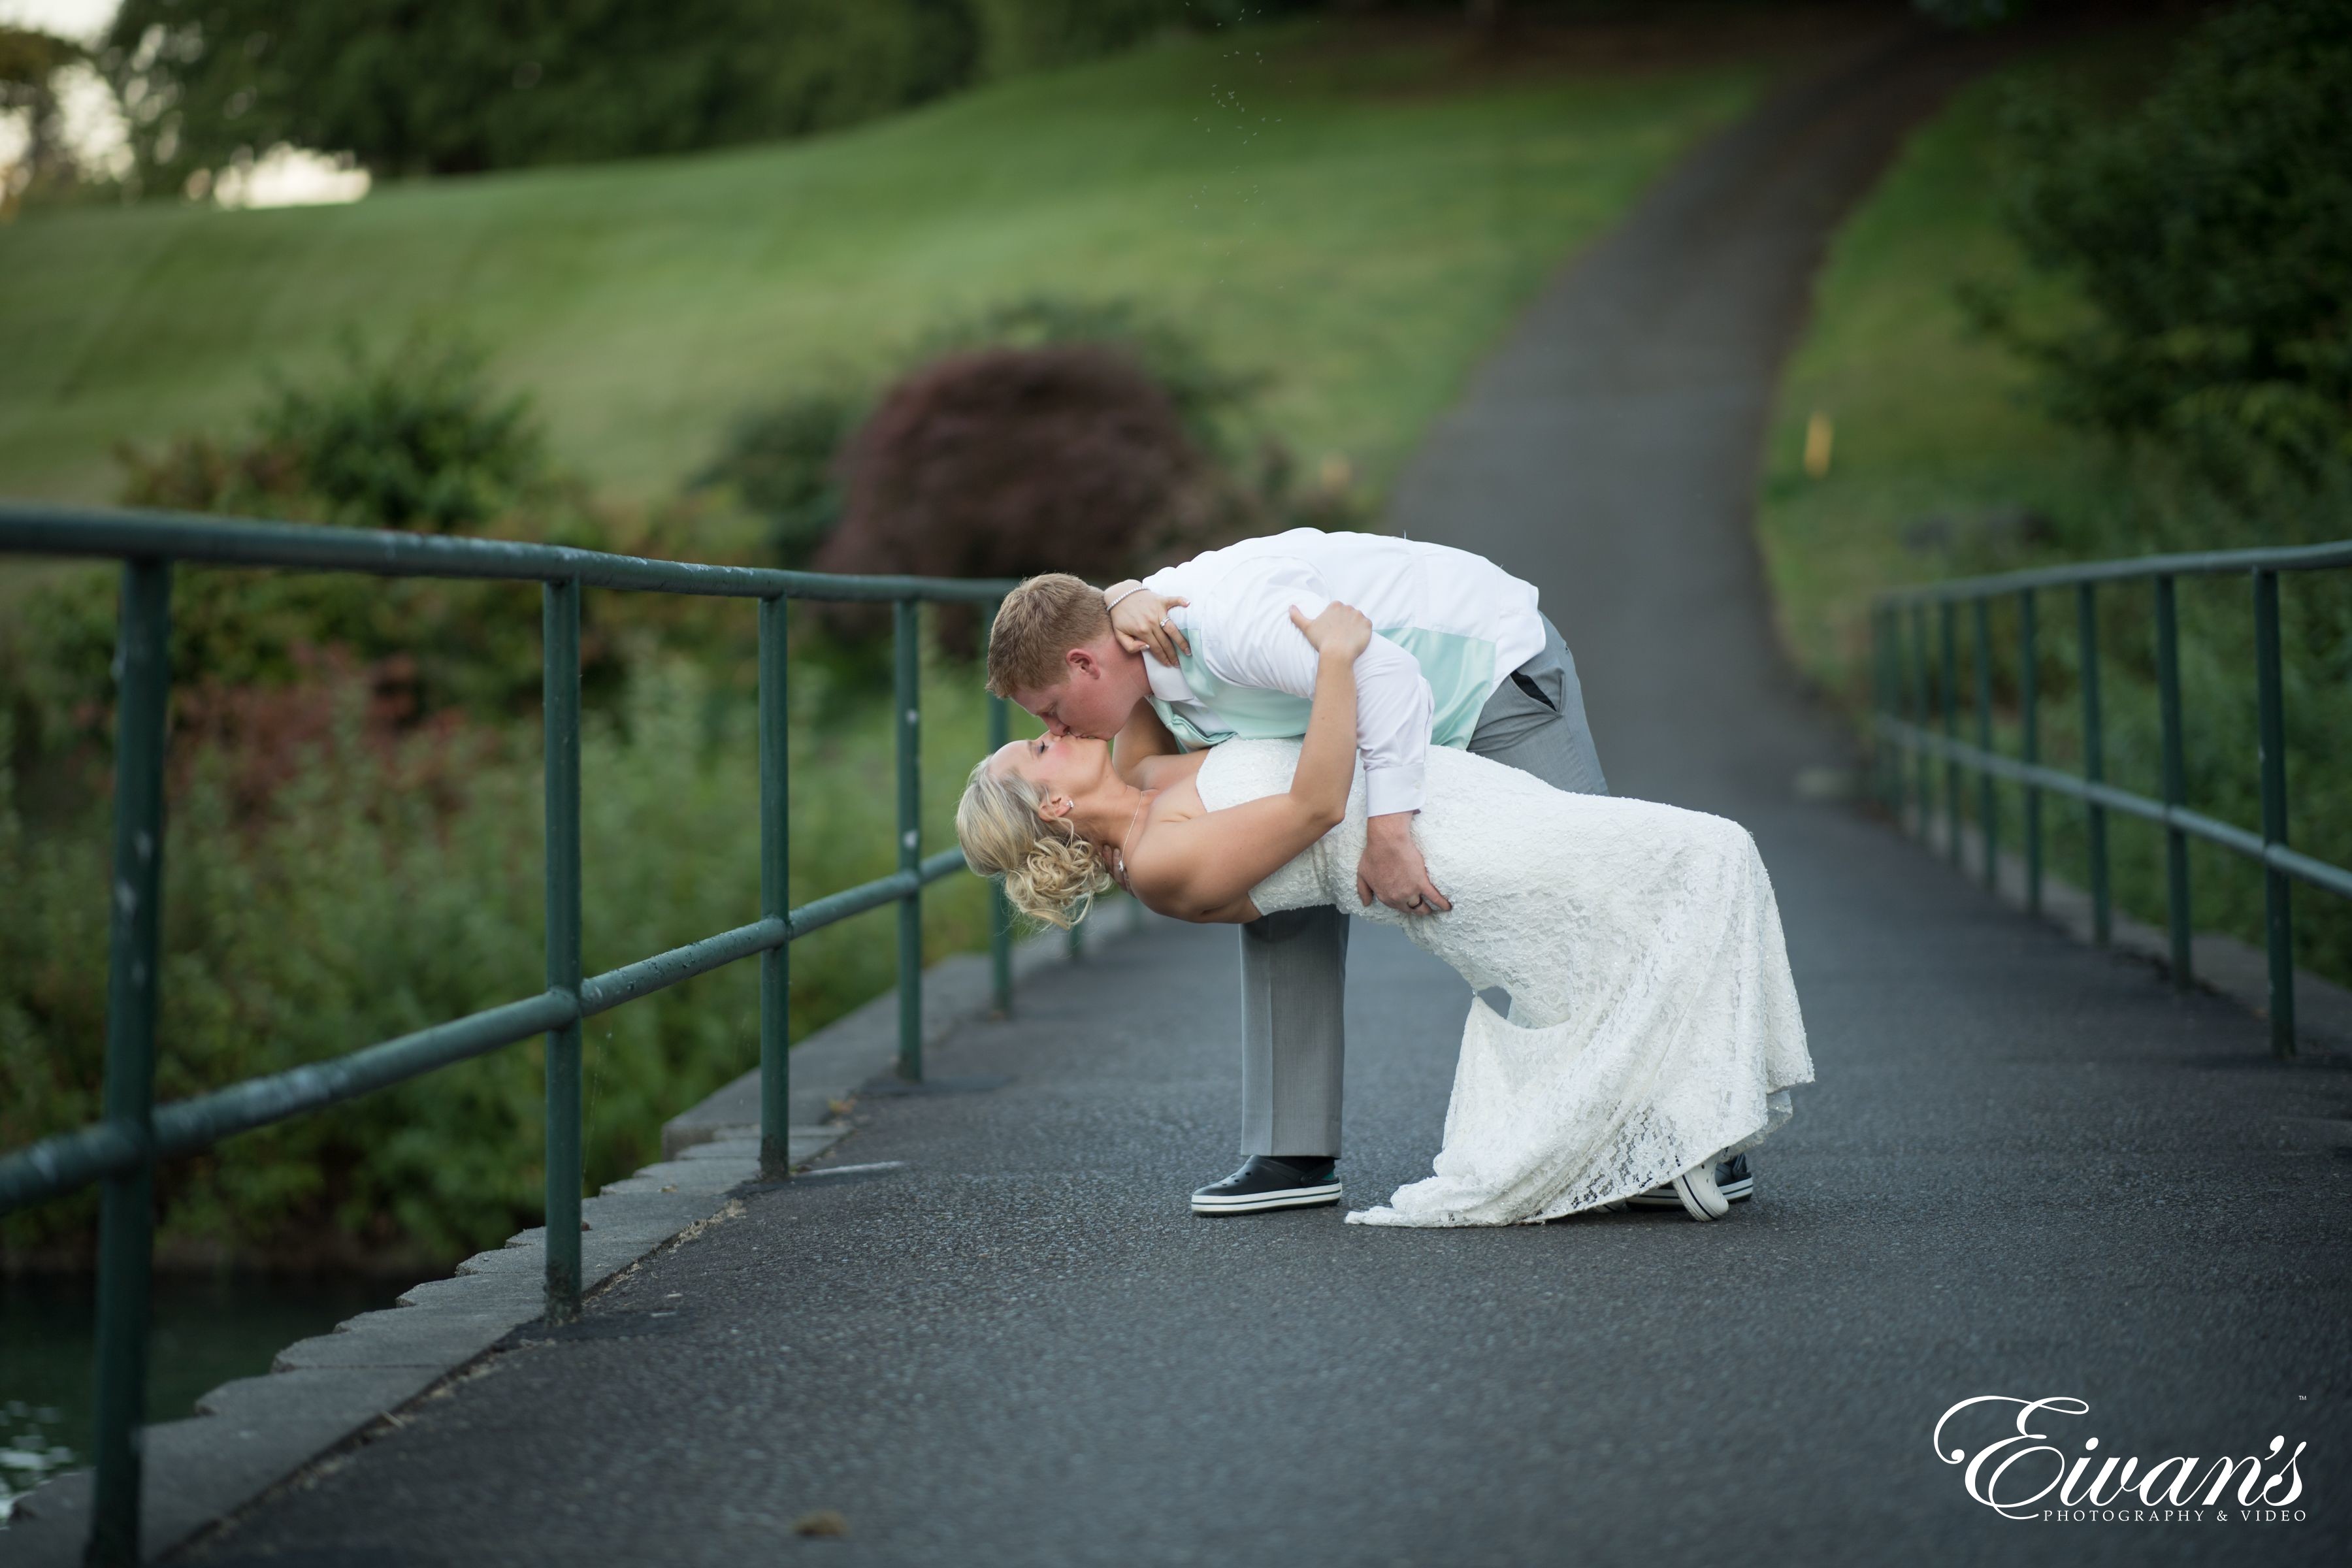 Finding the Right Wedding Photography Style for Your Wedding Vision